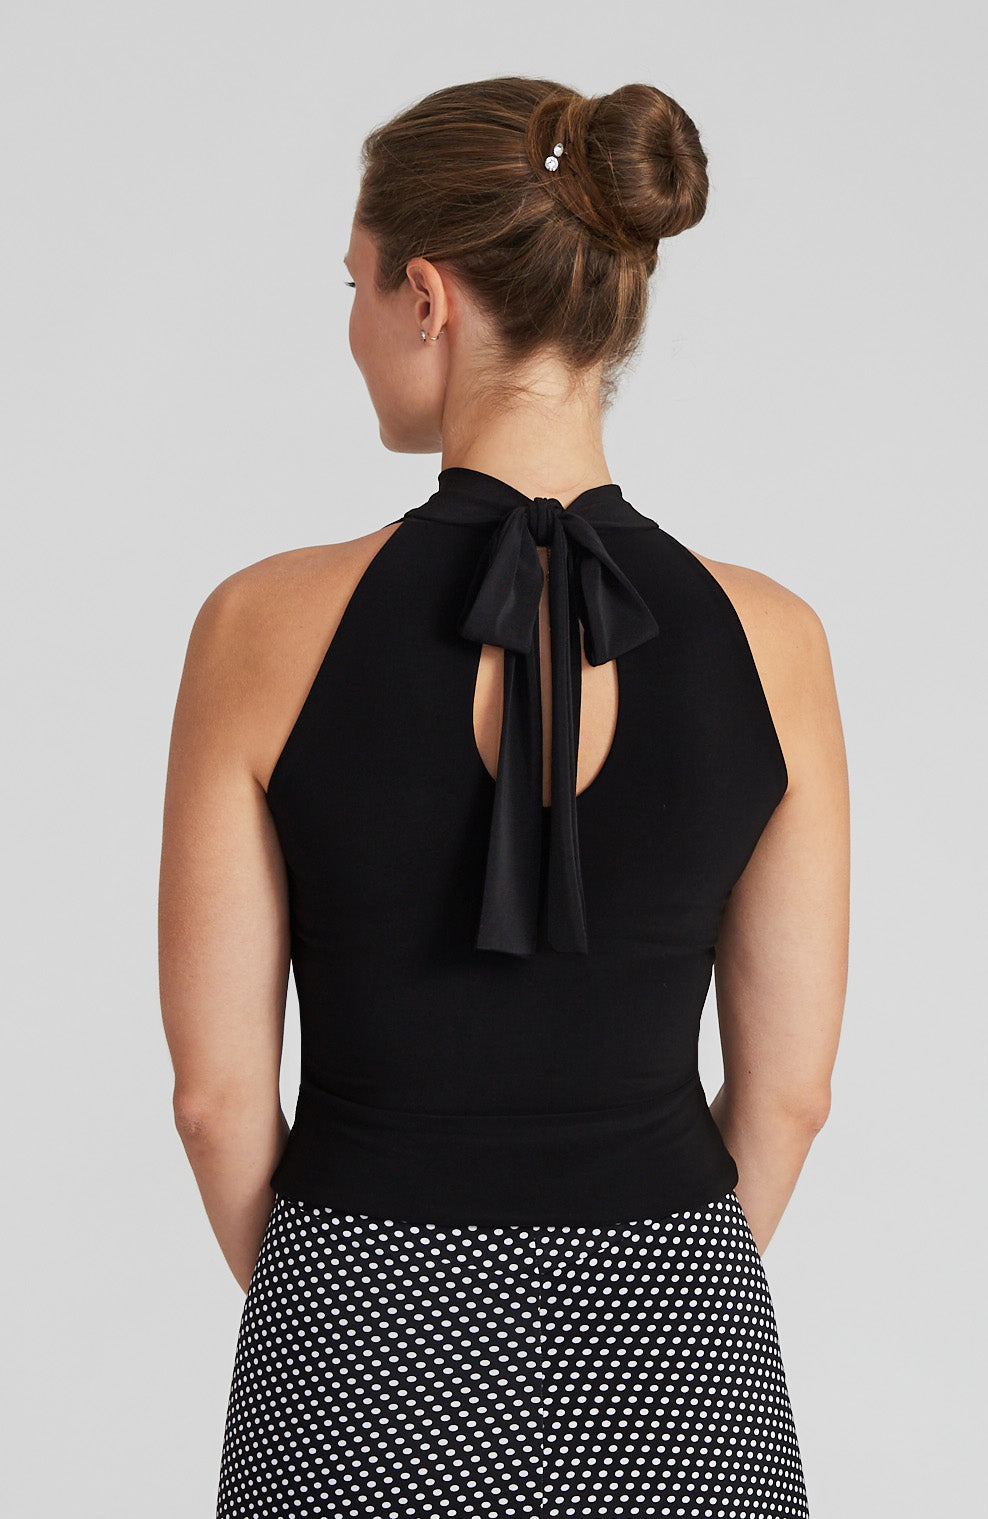 LYNN - Halter Neck Top with Bow in Black